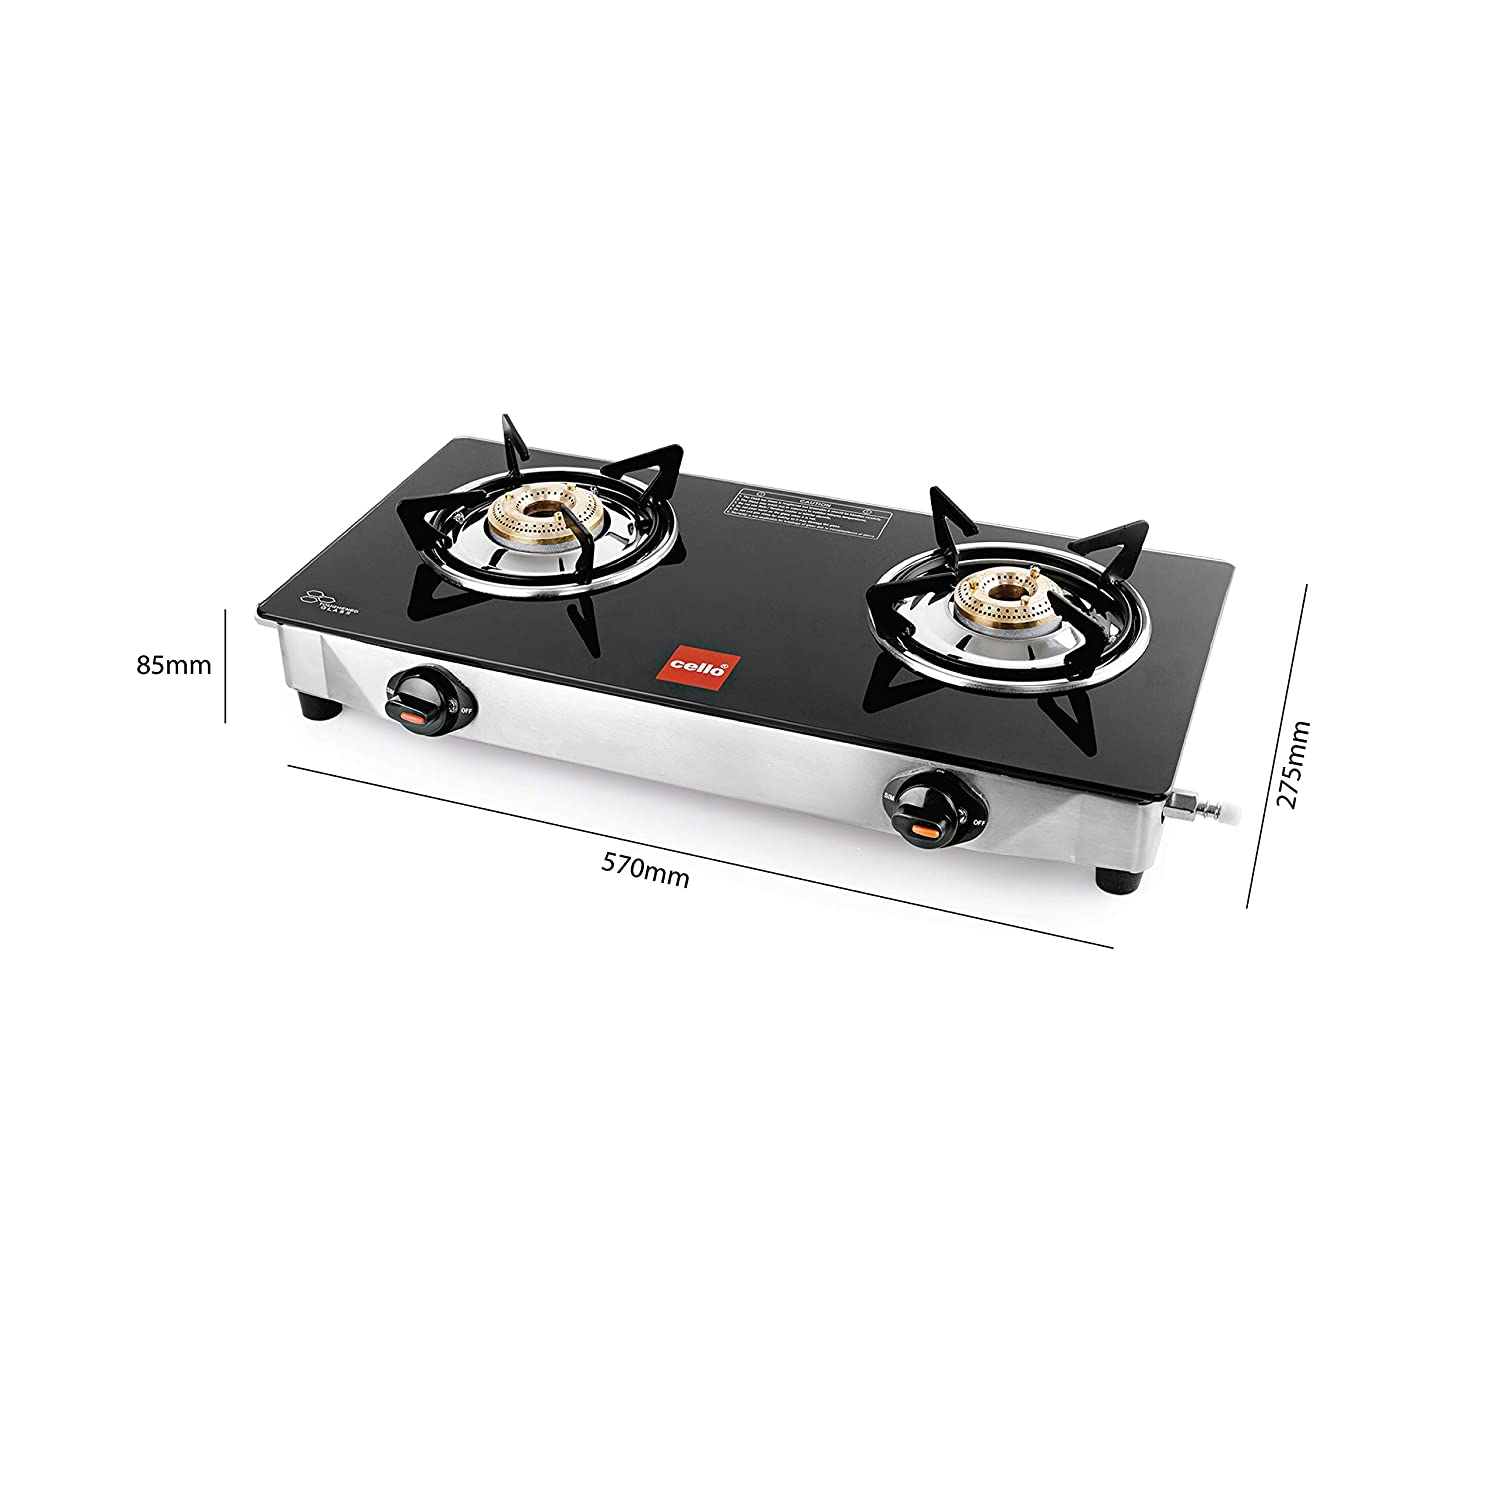 Buy Cello Glorious Glass Top 2 Burner Gas Stove, Manual Ignition, Black